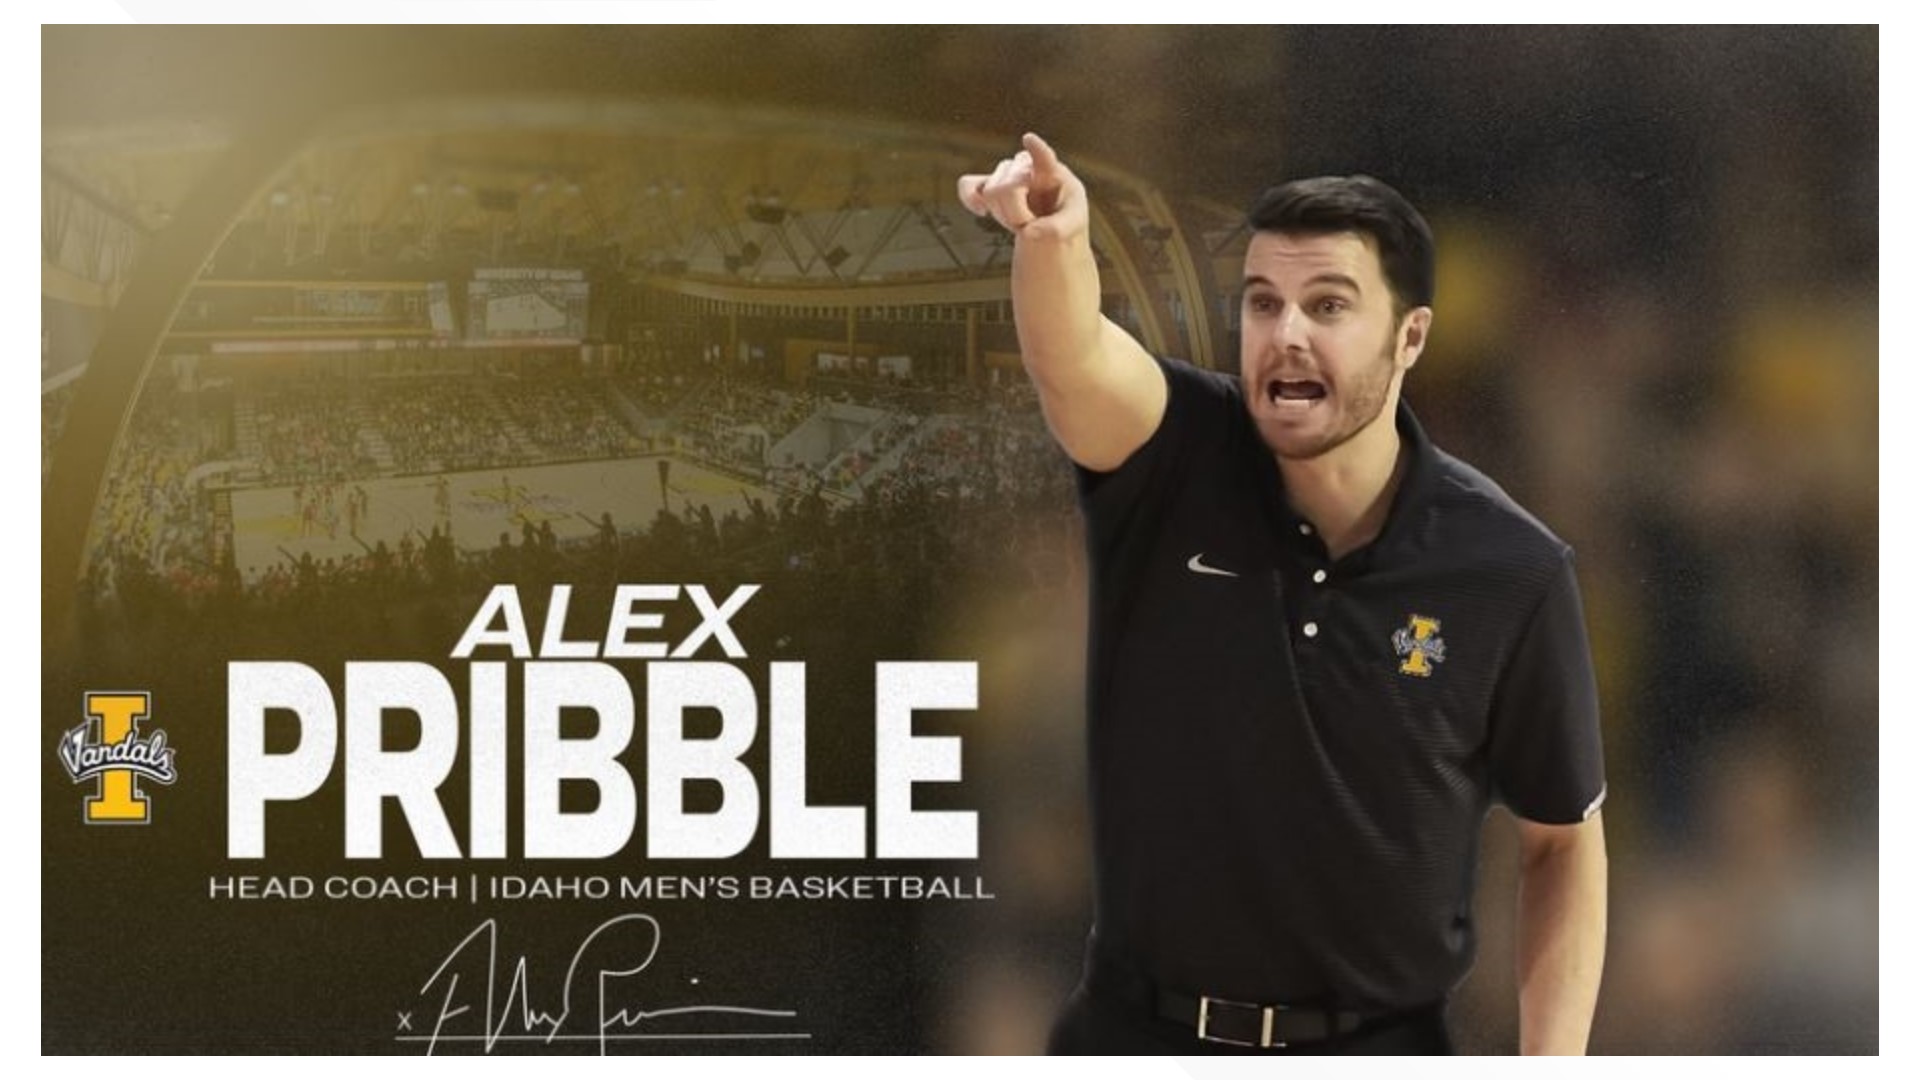 New head coach Alex Pribble has remade his entire roster in just over three months in charge.